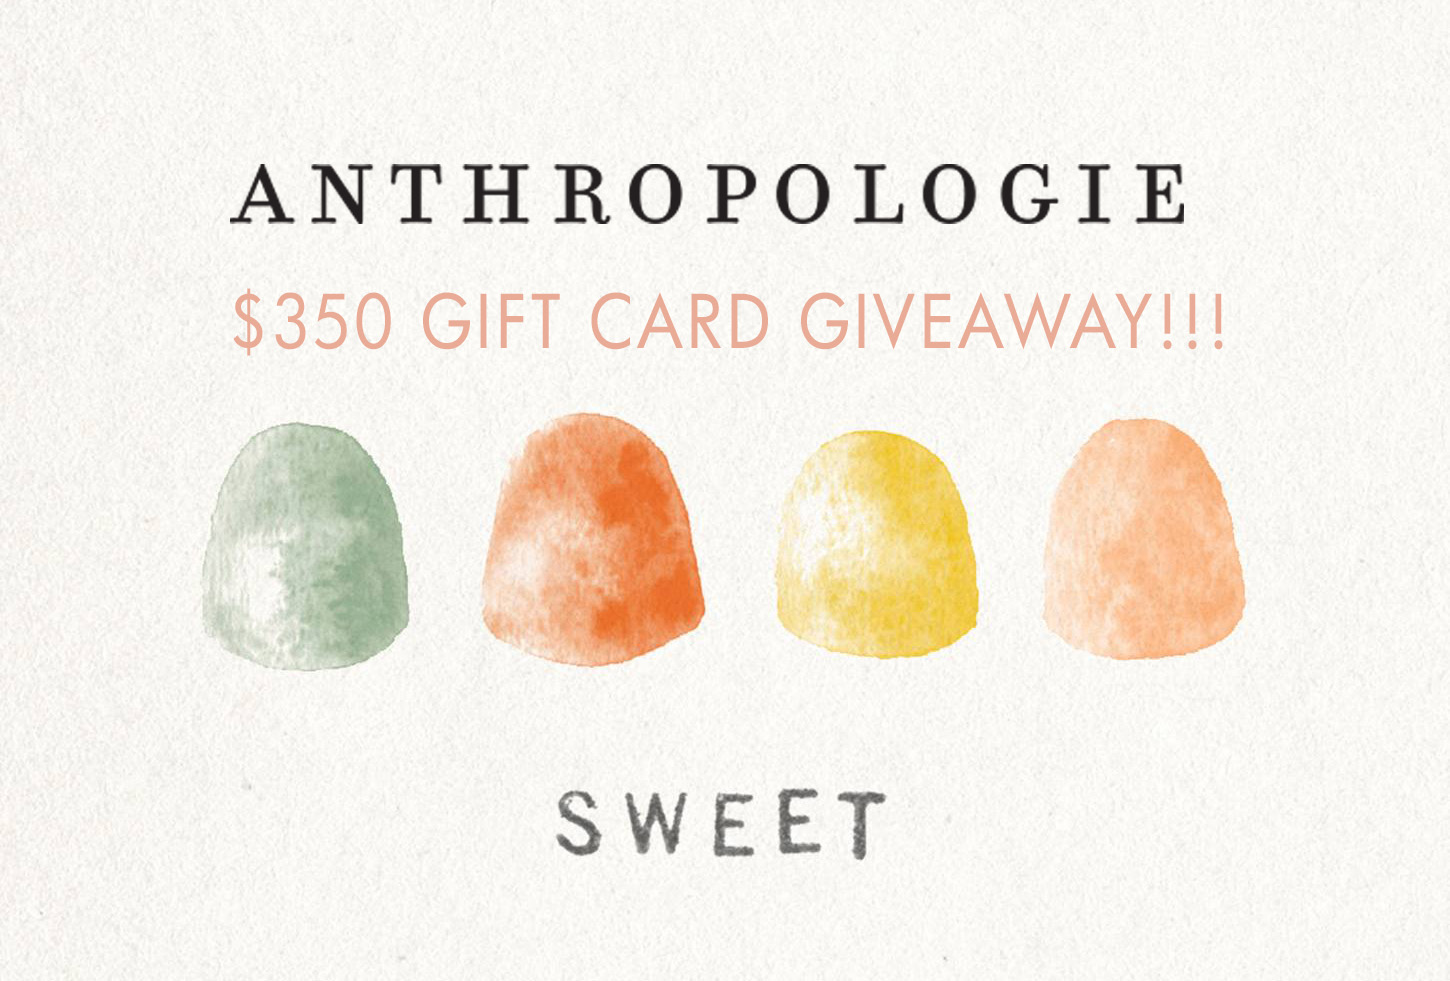 Win a $350 Anthropologie Gift Card!